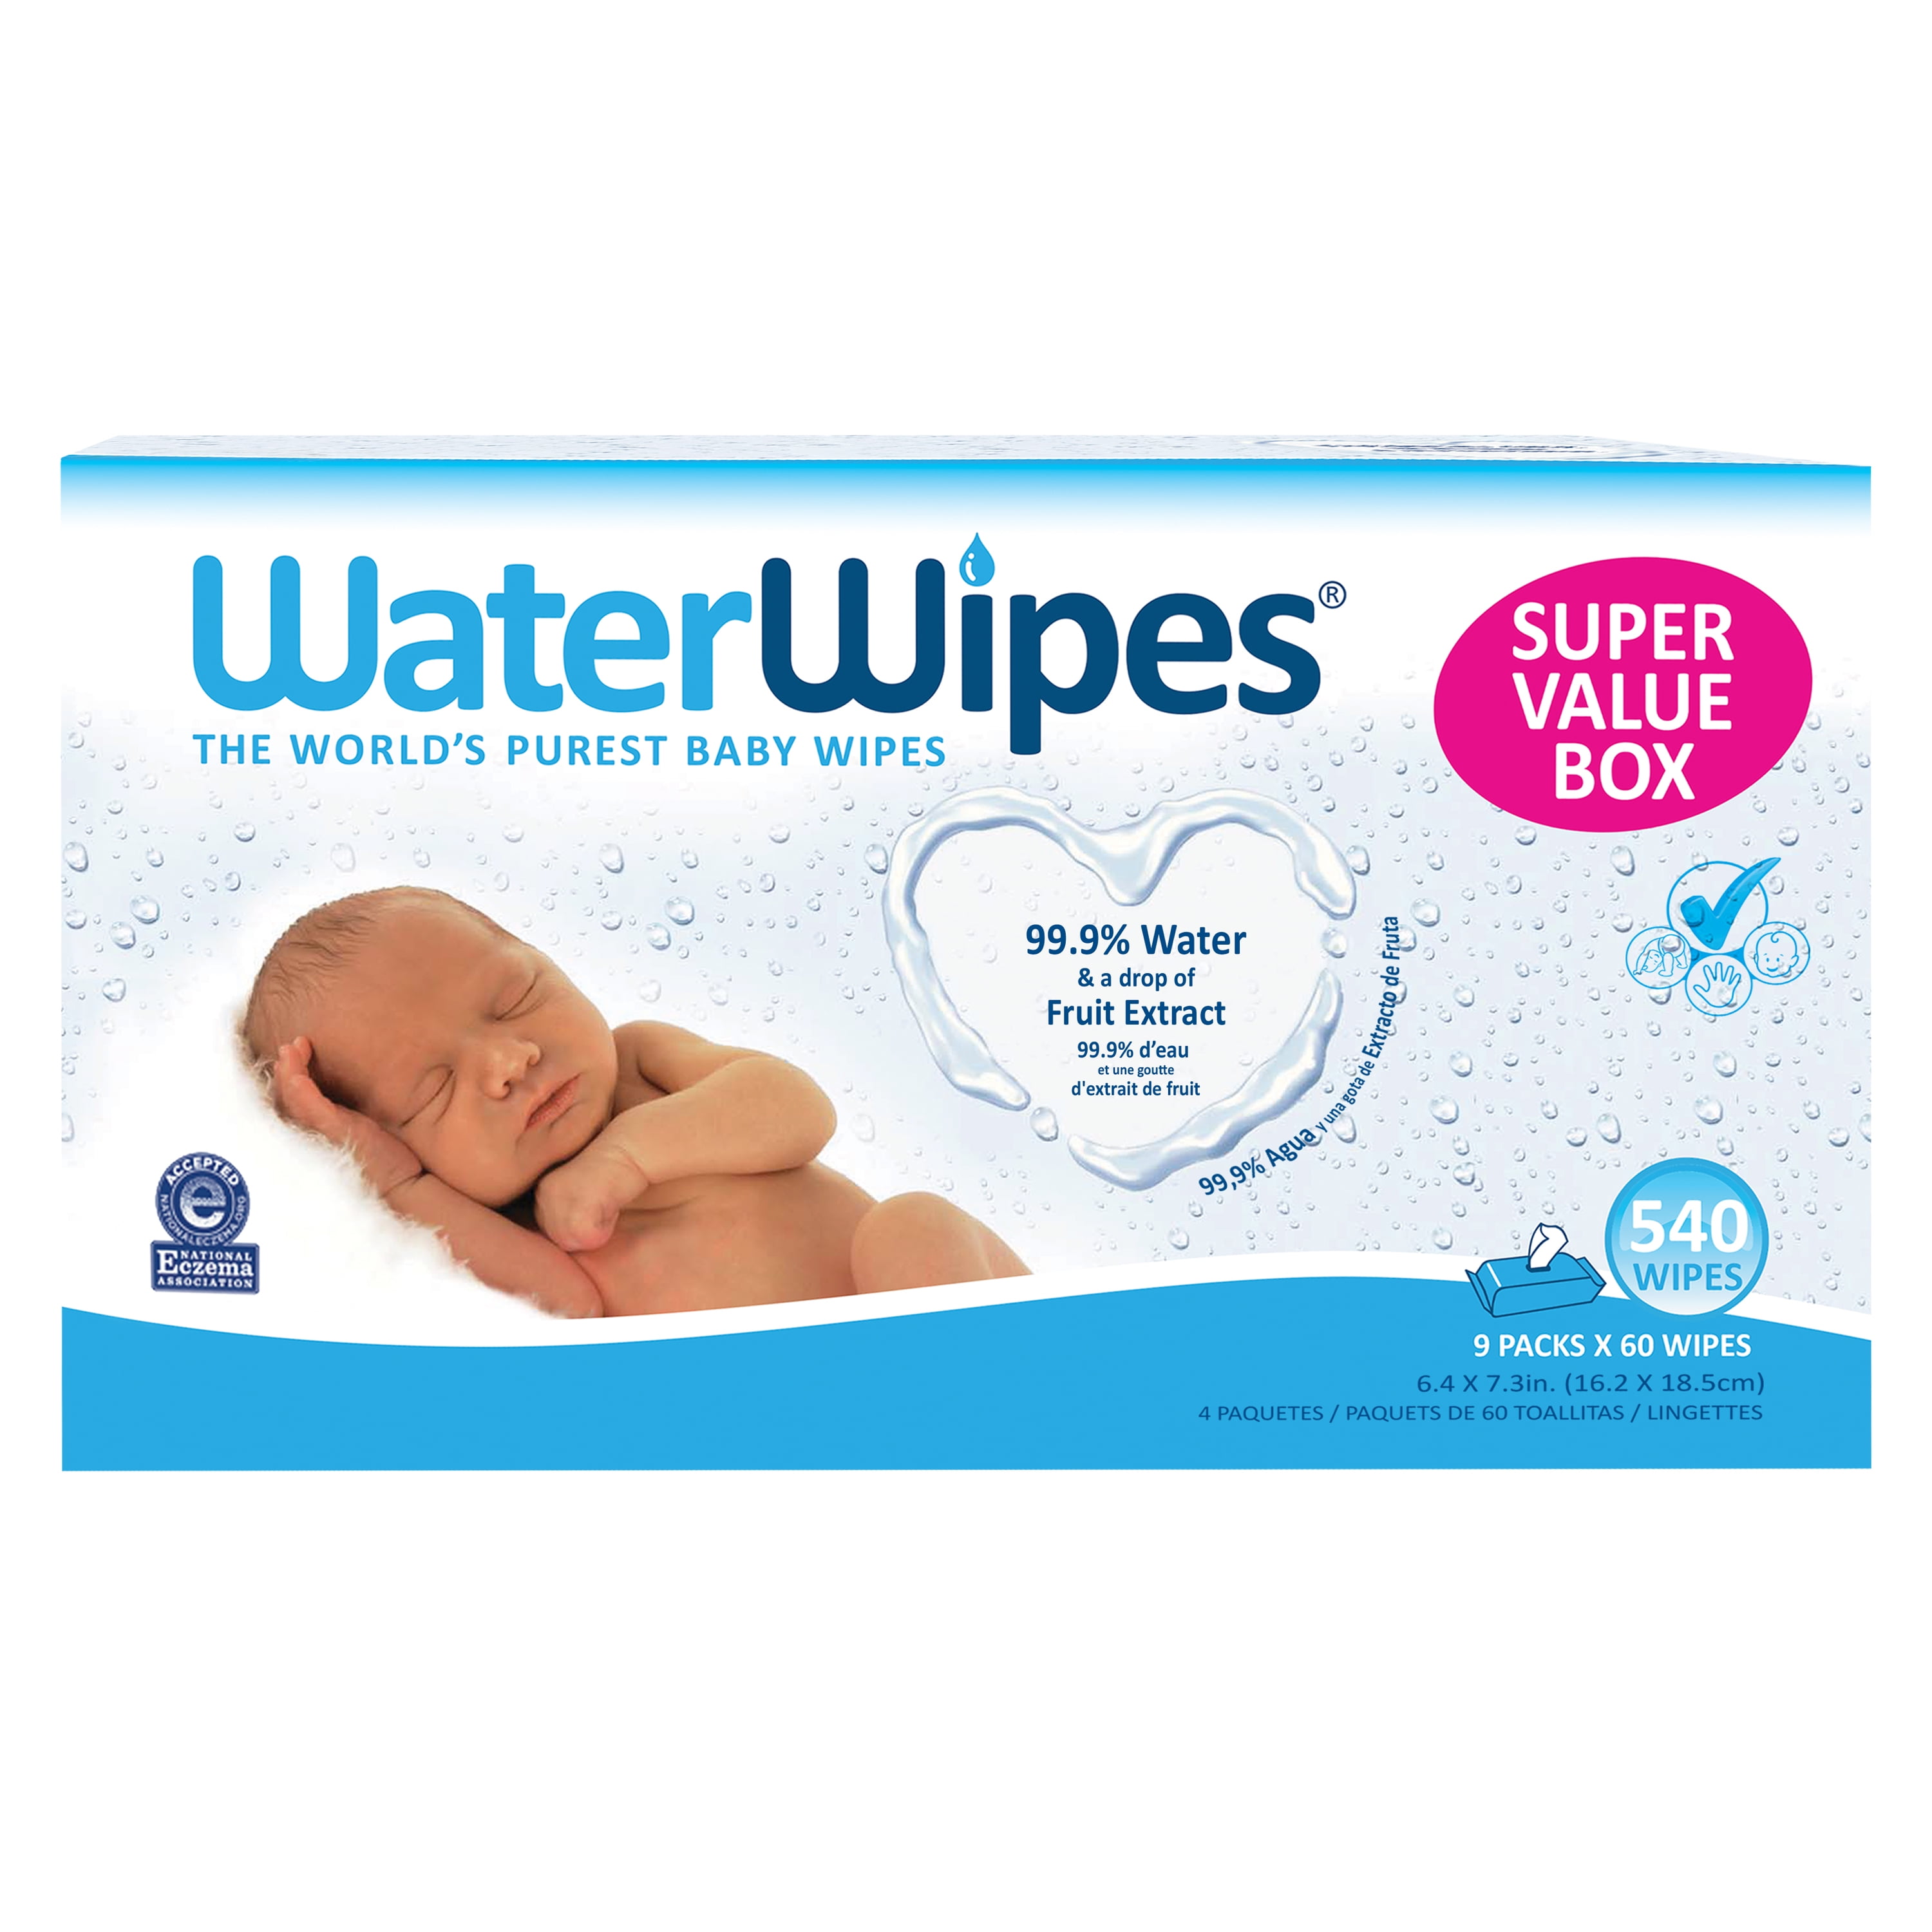 waterwipes super value box 540 wipes